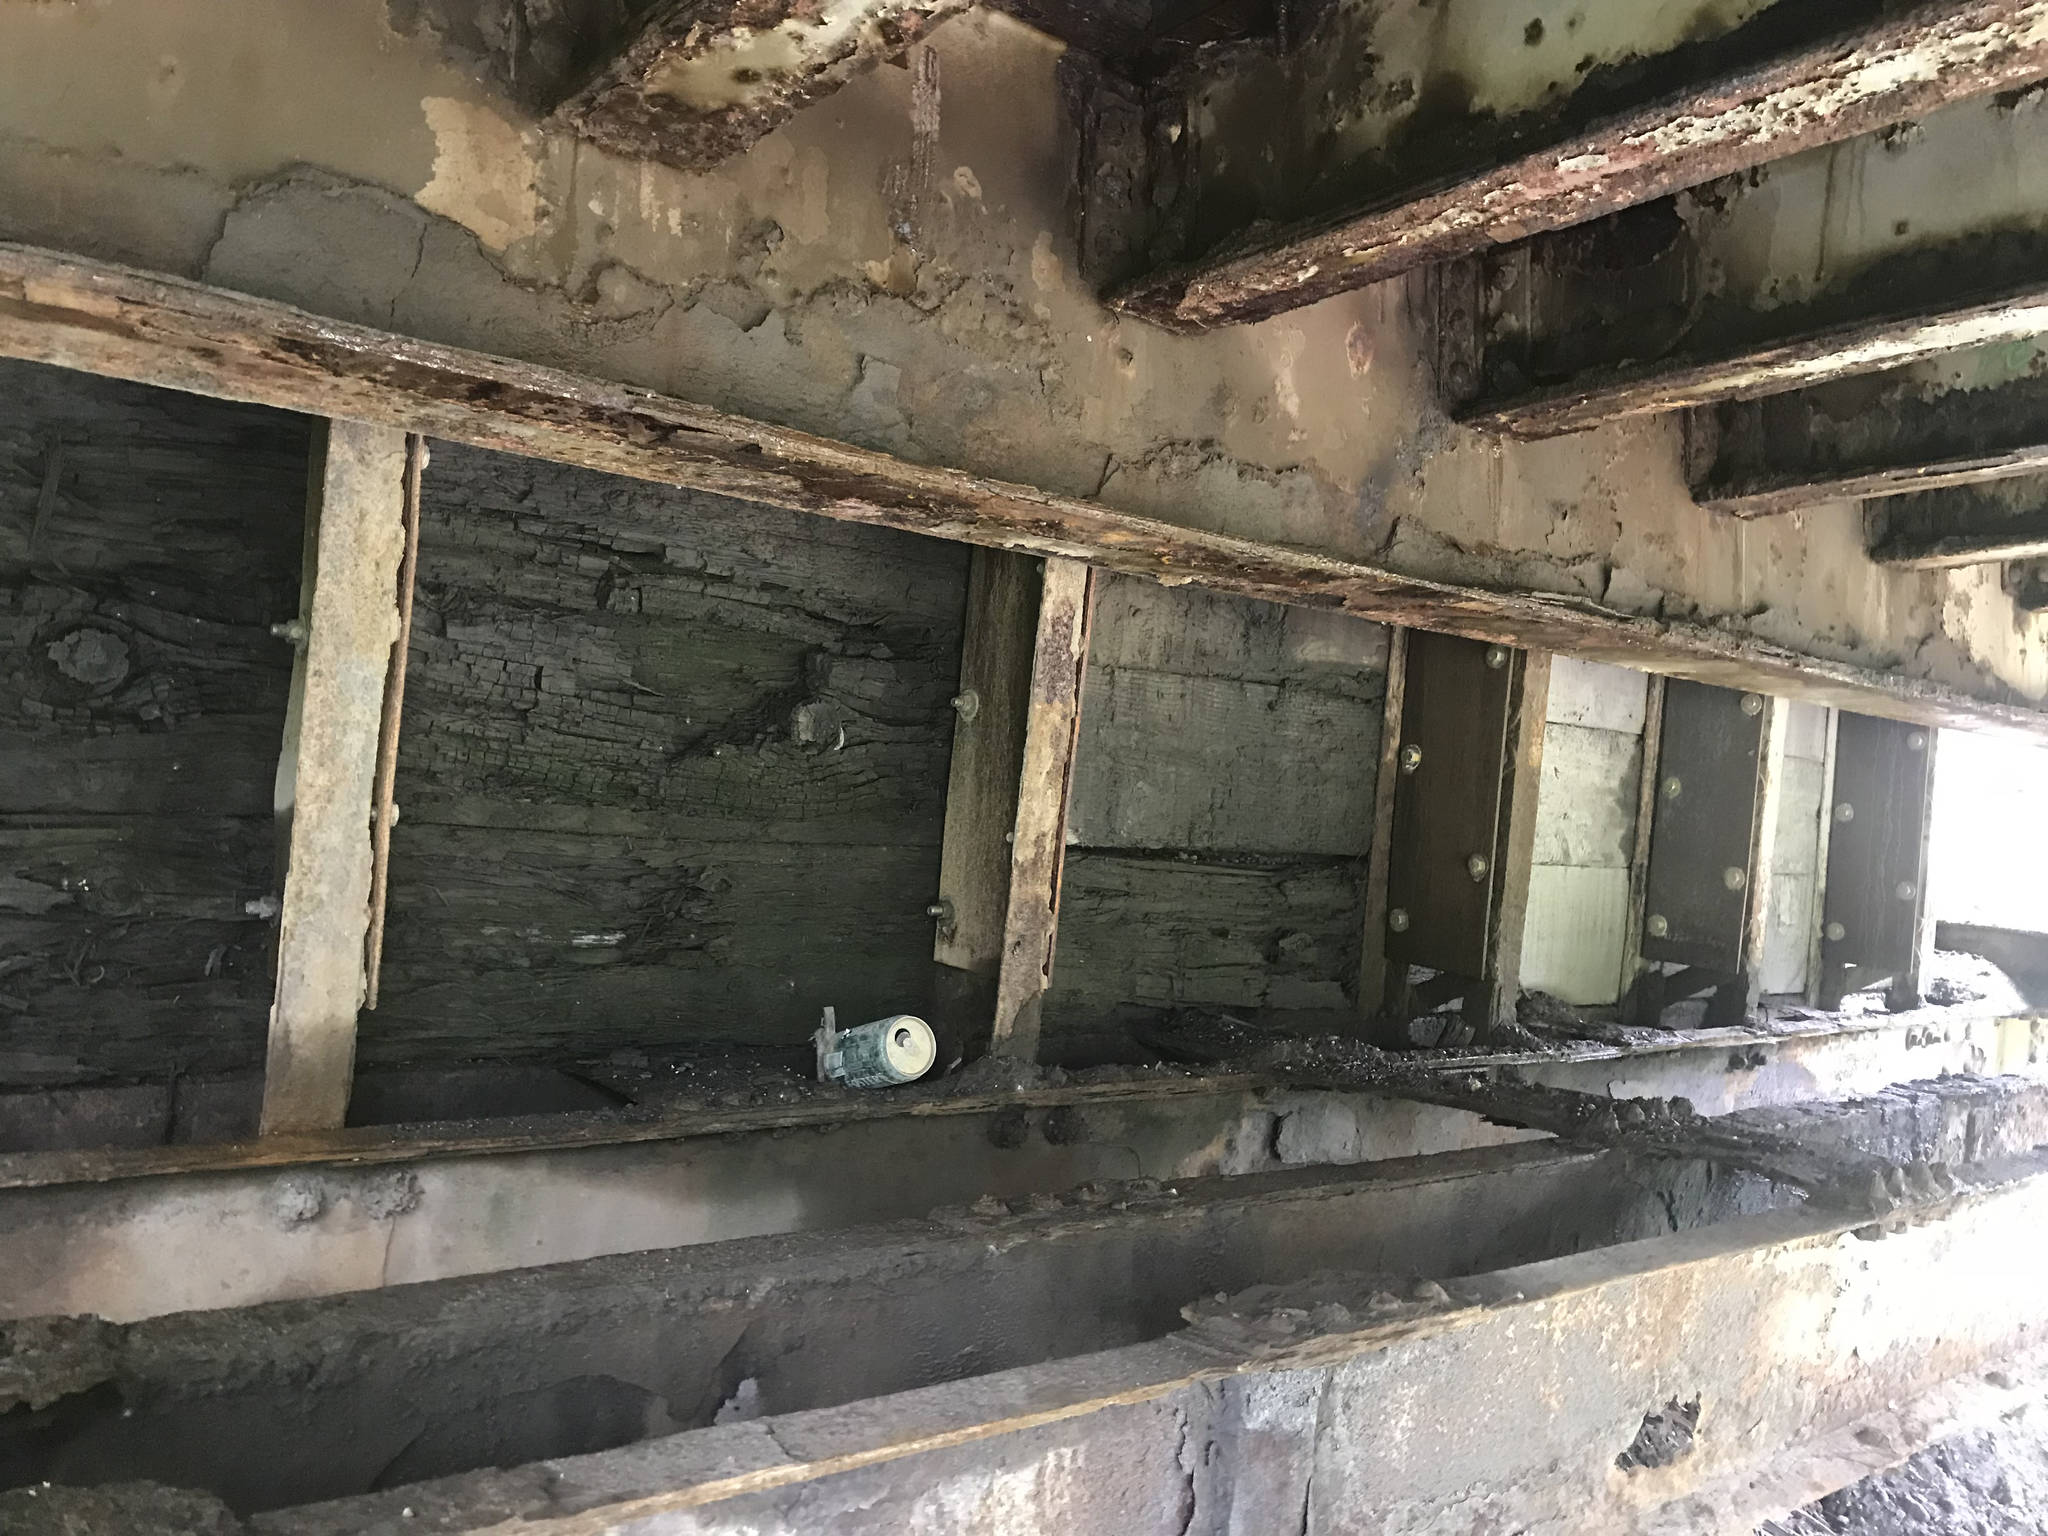 This photo taken on July 26, 2018, from underneath the Anchor River bridge abutment shows where wooden timbers have rotted on the bridge near Anchor Point, Alaska. (Photo by Paul Seaton)